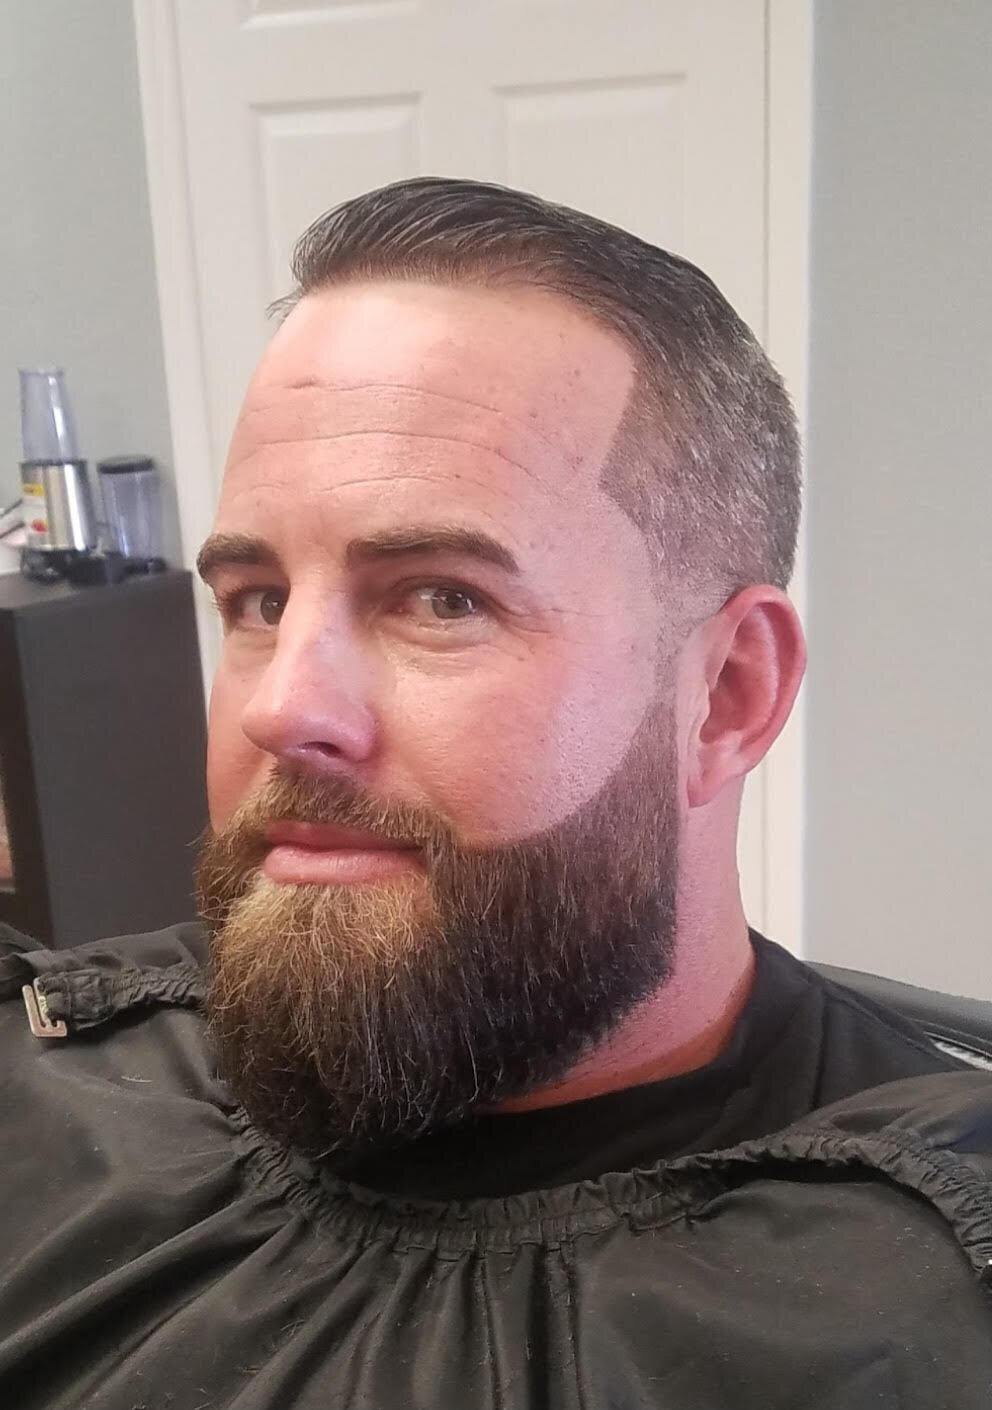 Clean Fade & Beard - Who's Your Barber in Venice Florida